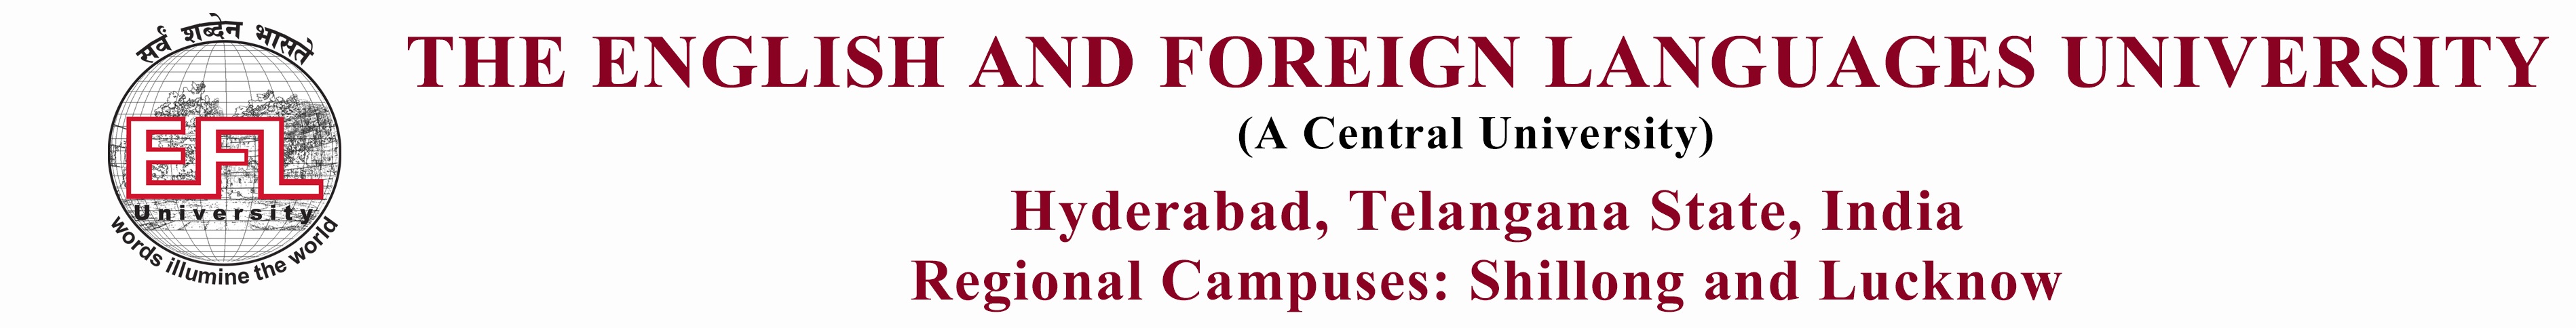 free foreign language courses by government